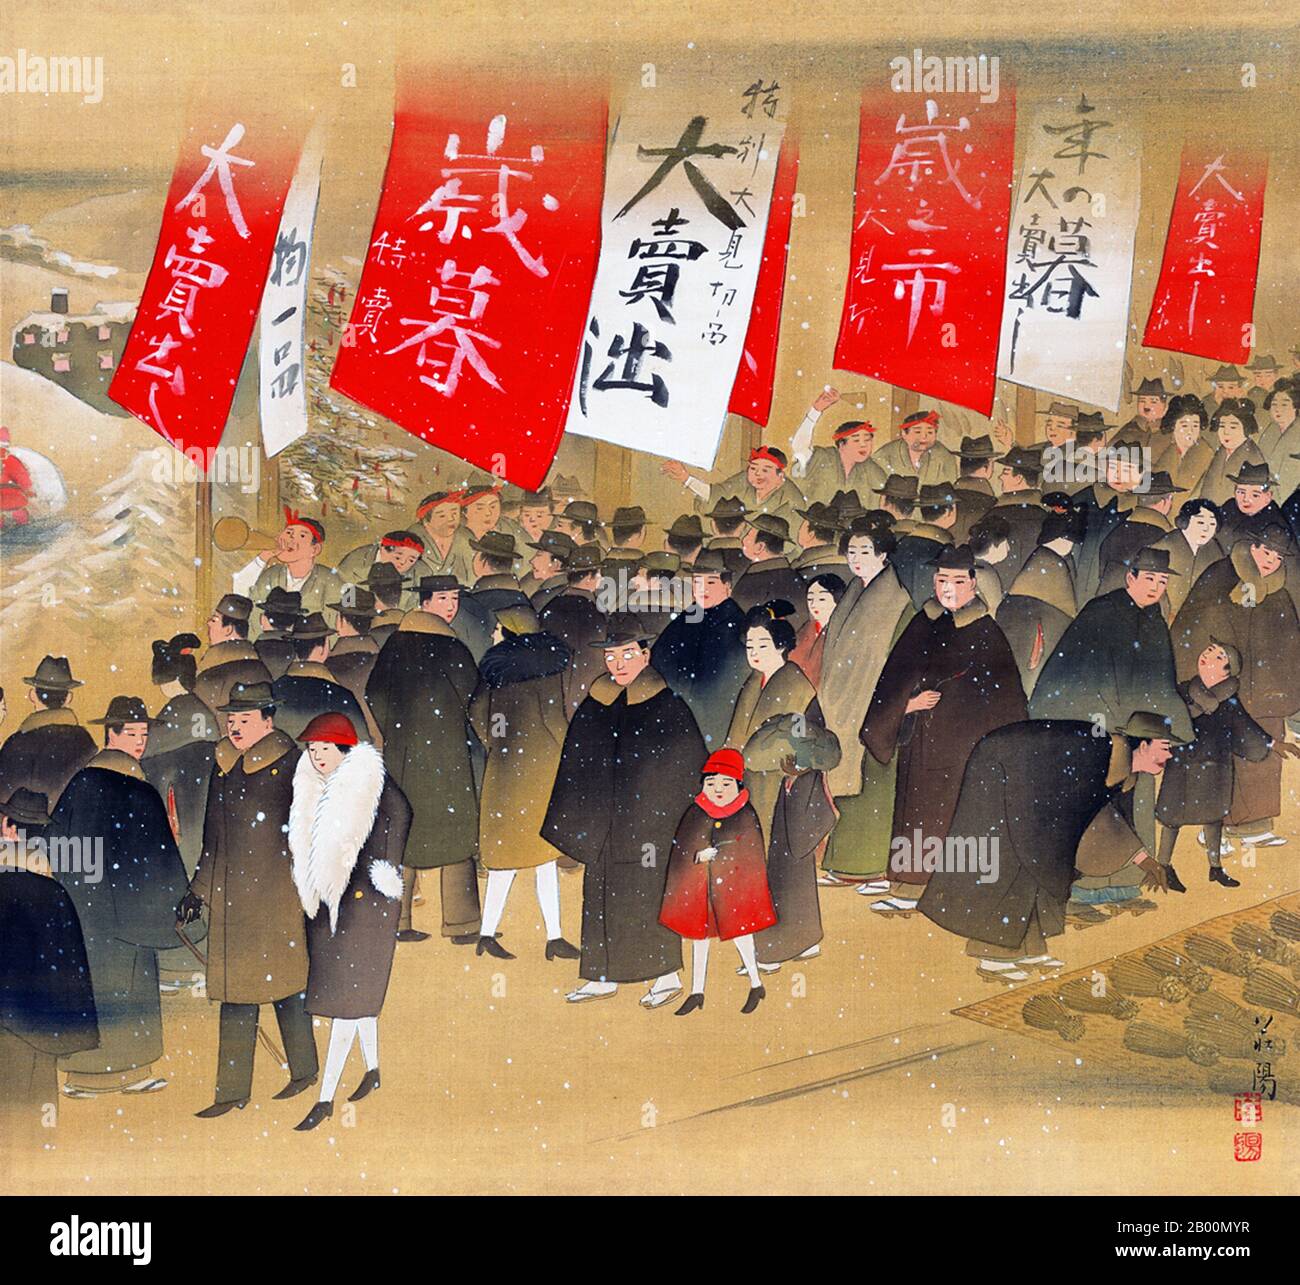 Japan: 'Traditional Festivals at Kyoto, Year-End Chestnut Festival'. From the Miyako Nenju Gyoji Gajo Album by by Nakajima Soyo, 1928.  With some 2000 religious sites - 1600 Buddhist temples and 400 Shinto shrines, as well as palaces, gardens and architecture, Kyoto is one of the best preserved and most culturally distinguished cities in Japan.  Among the most famous temples are Kiyomizu-dera, a magnificent wooden temple supported by pillars off the slope of a mountain; Kinkaku-ji, the Temple of the Golden Pavilion; and Ryōan-ji, famous for its rock garden. Stock Photo